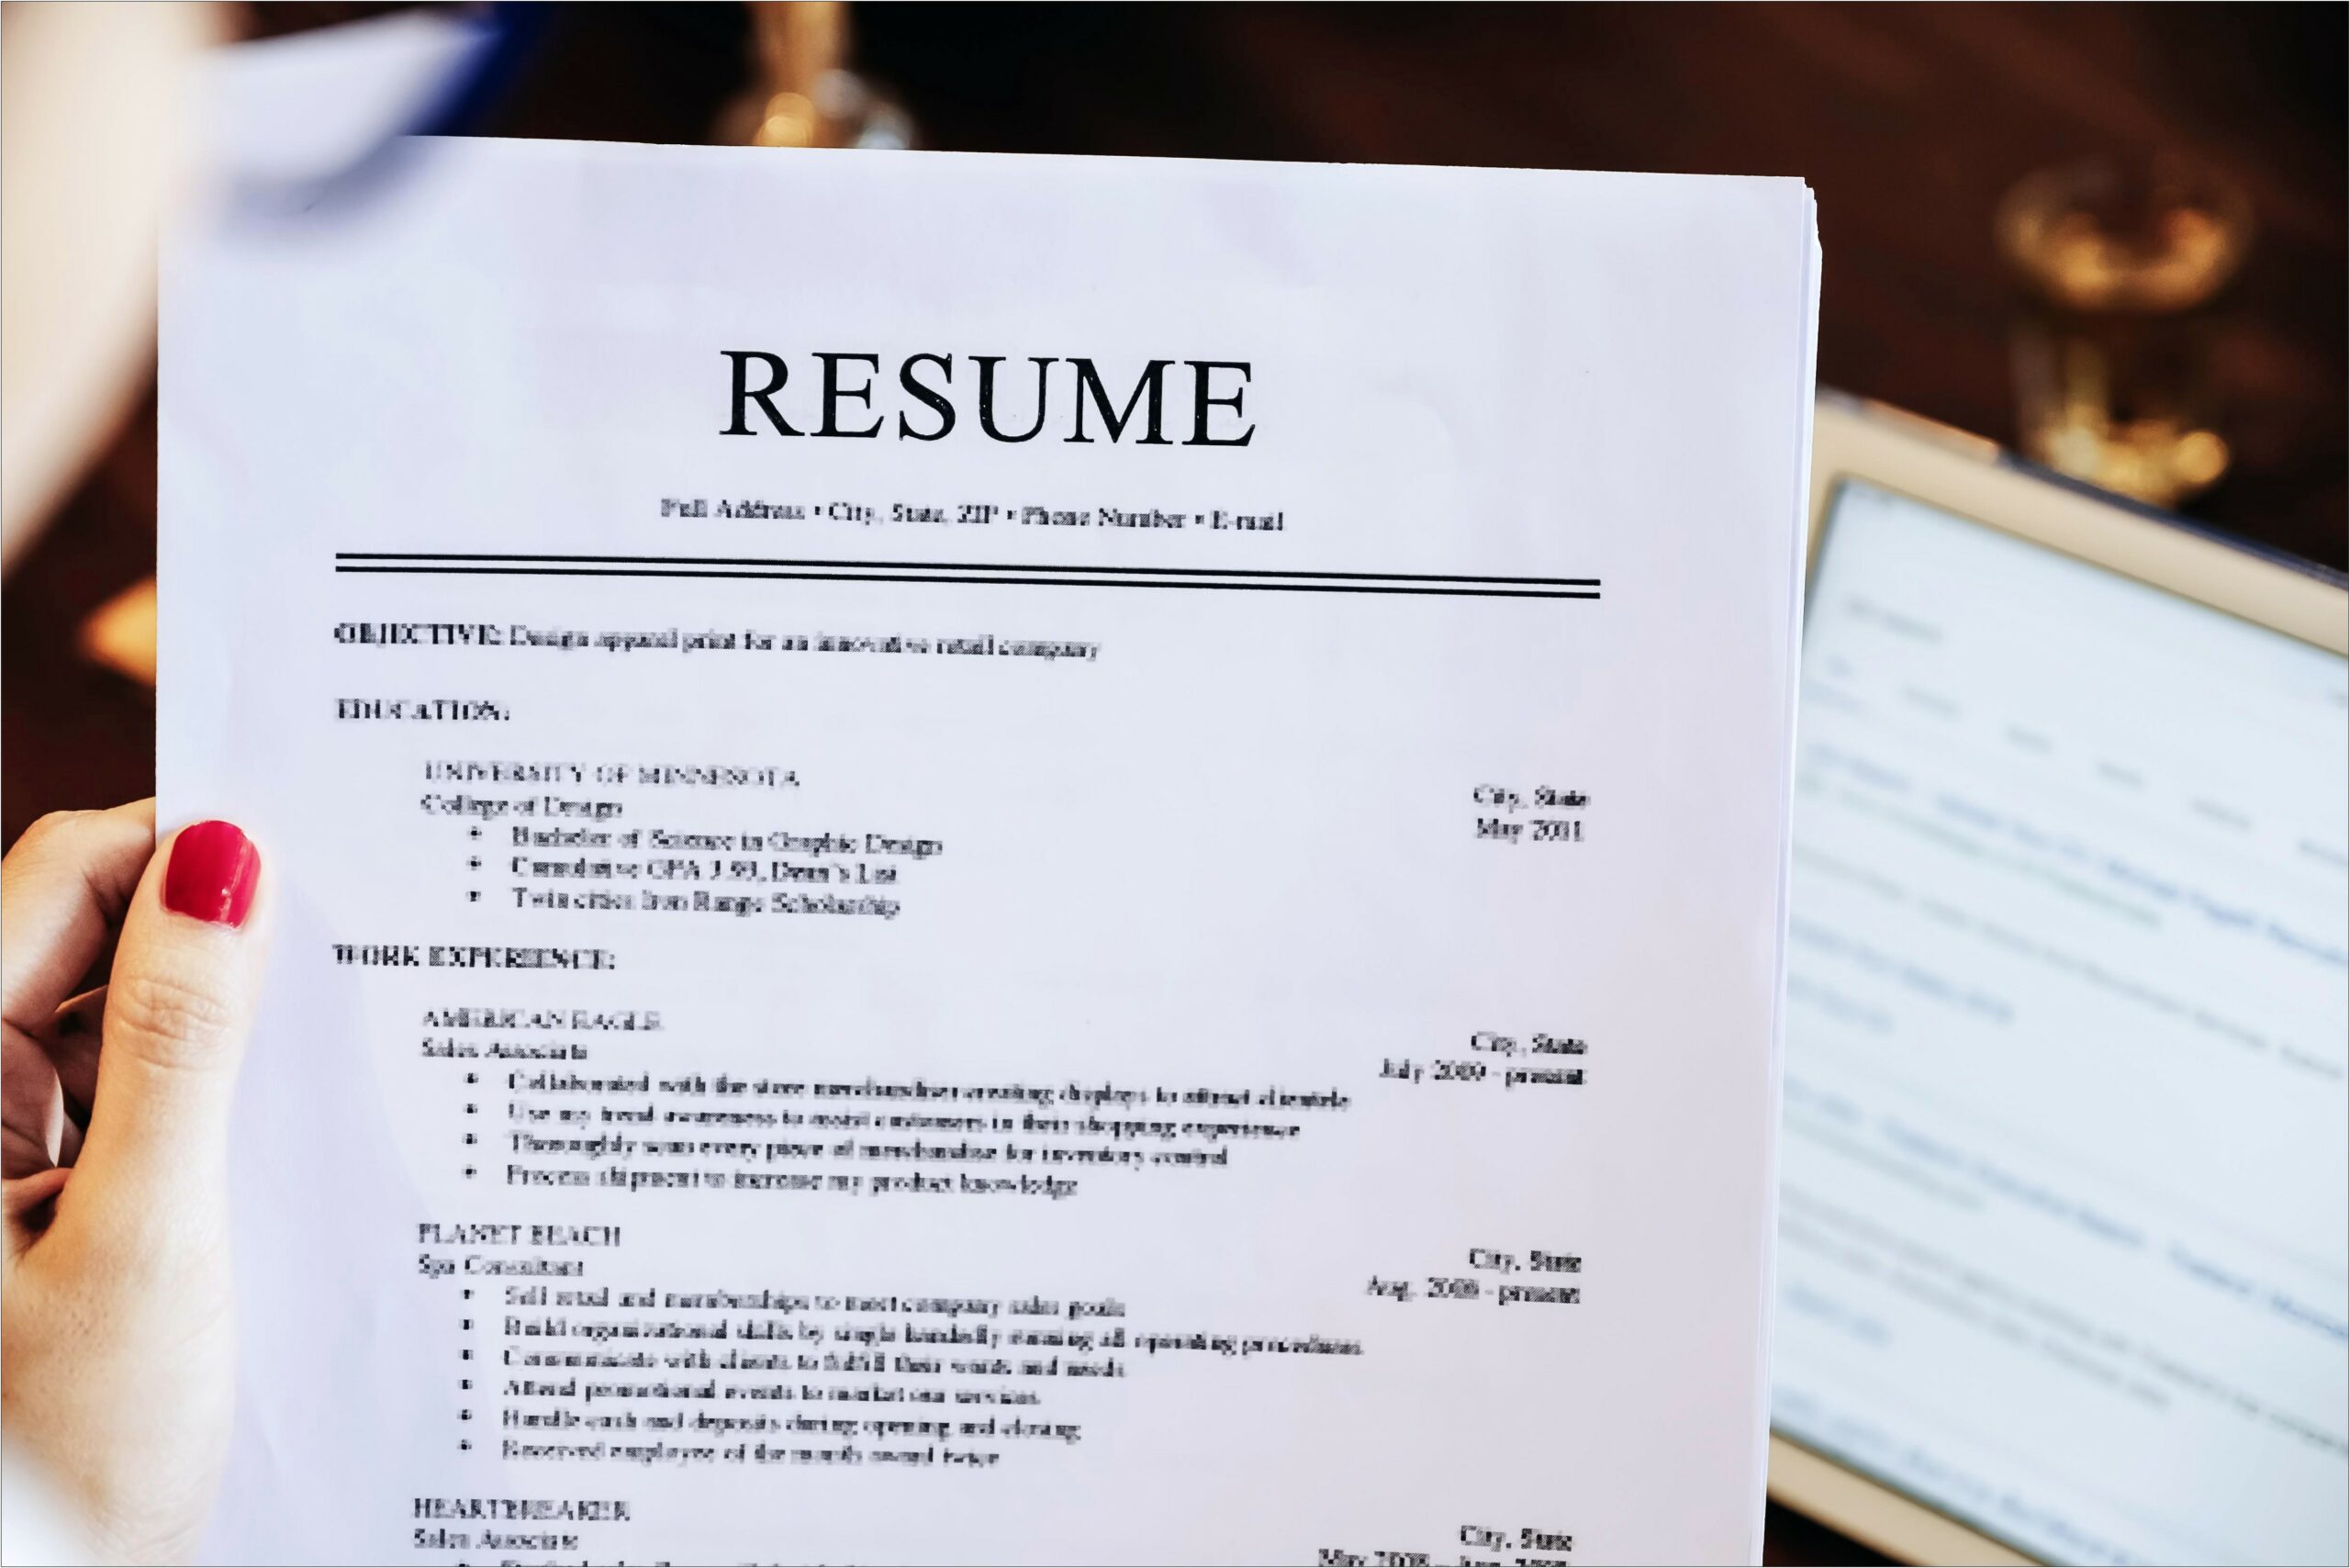 Where To List Volunteer Work On A Resume